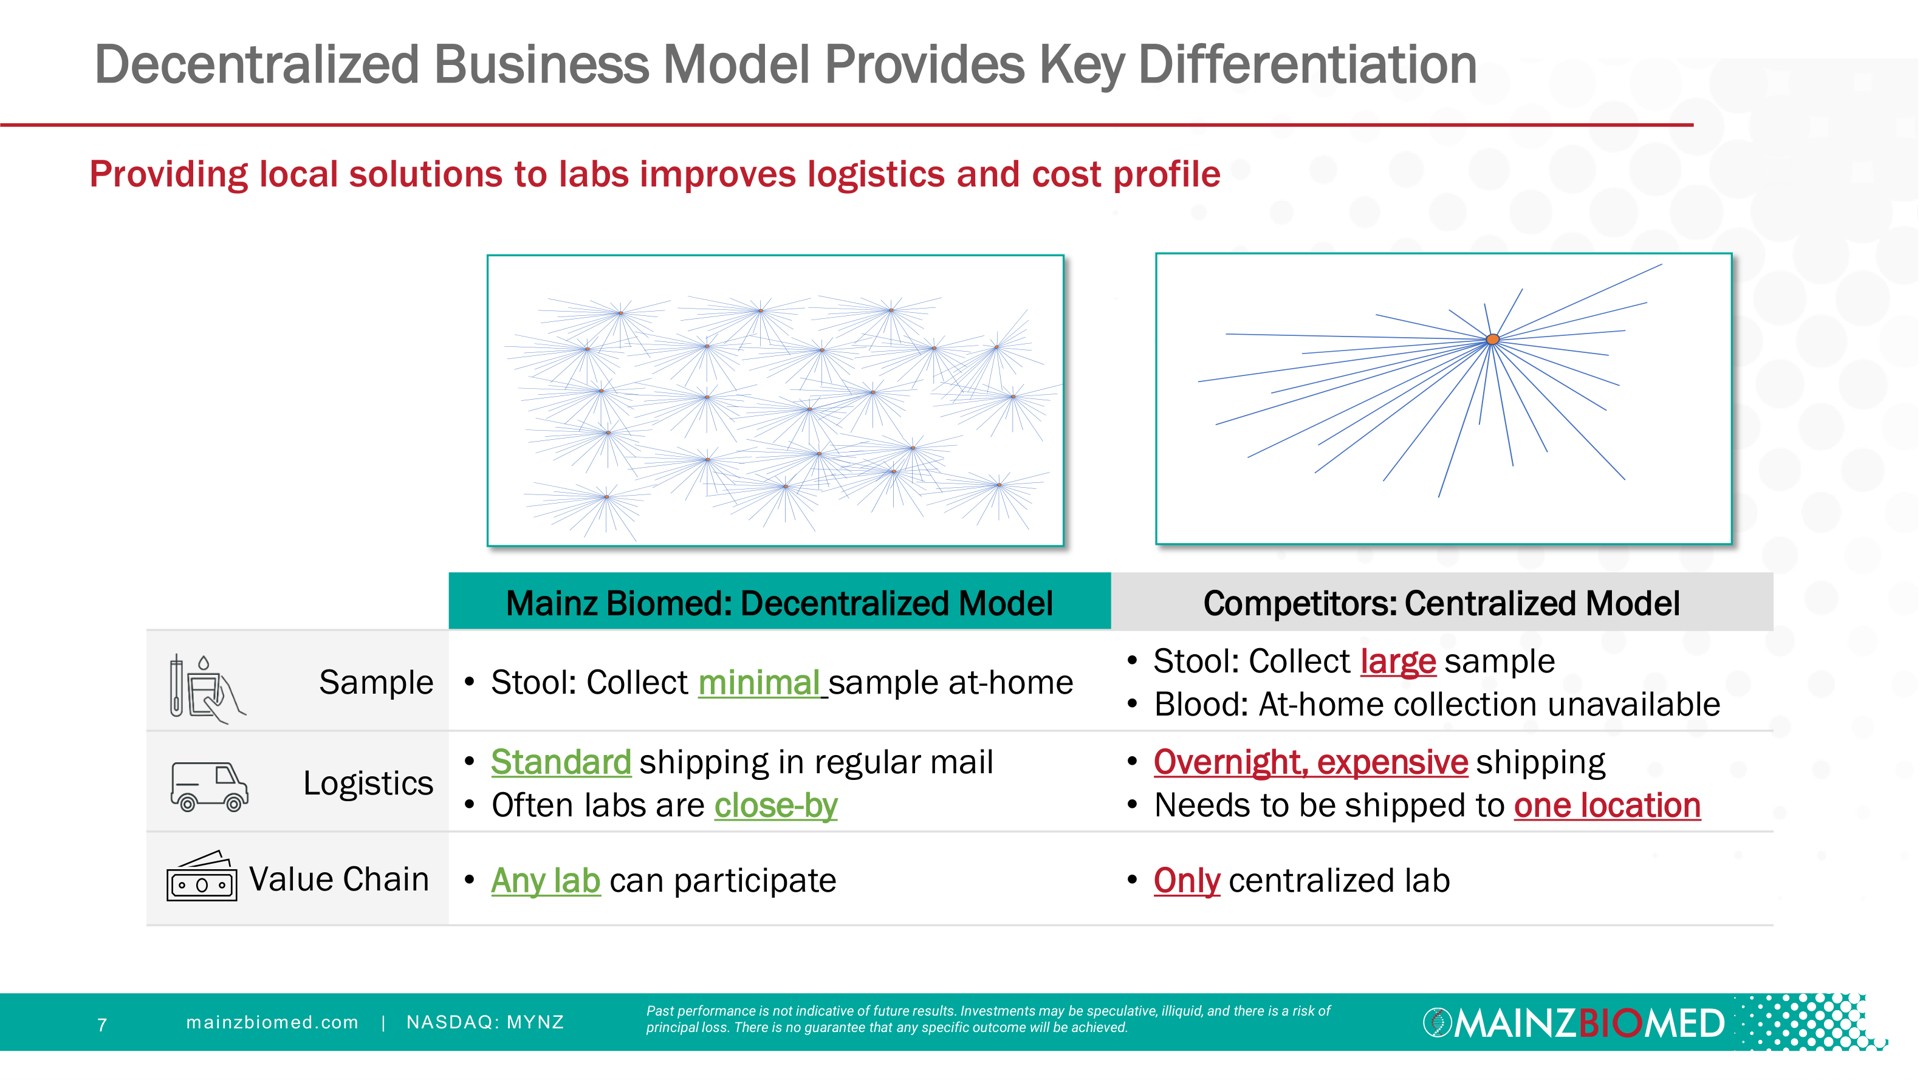 decentralized business model provides key differentiation competitors centralized own | Mainz Biomed NV